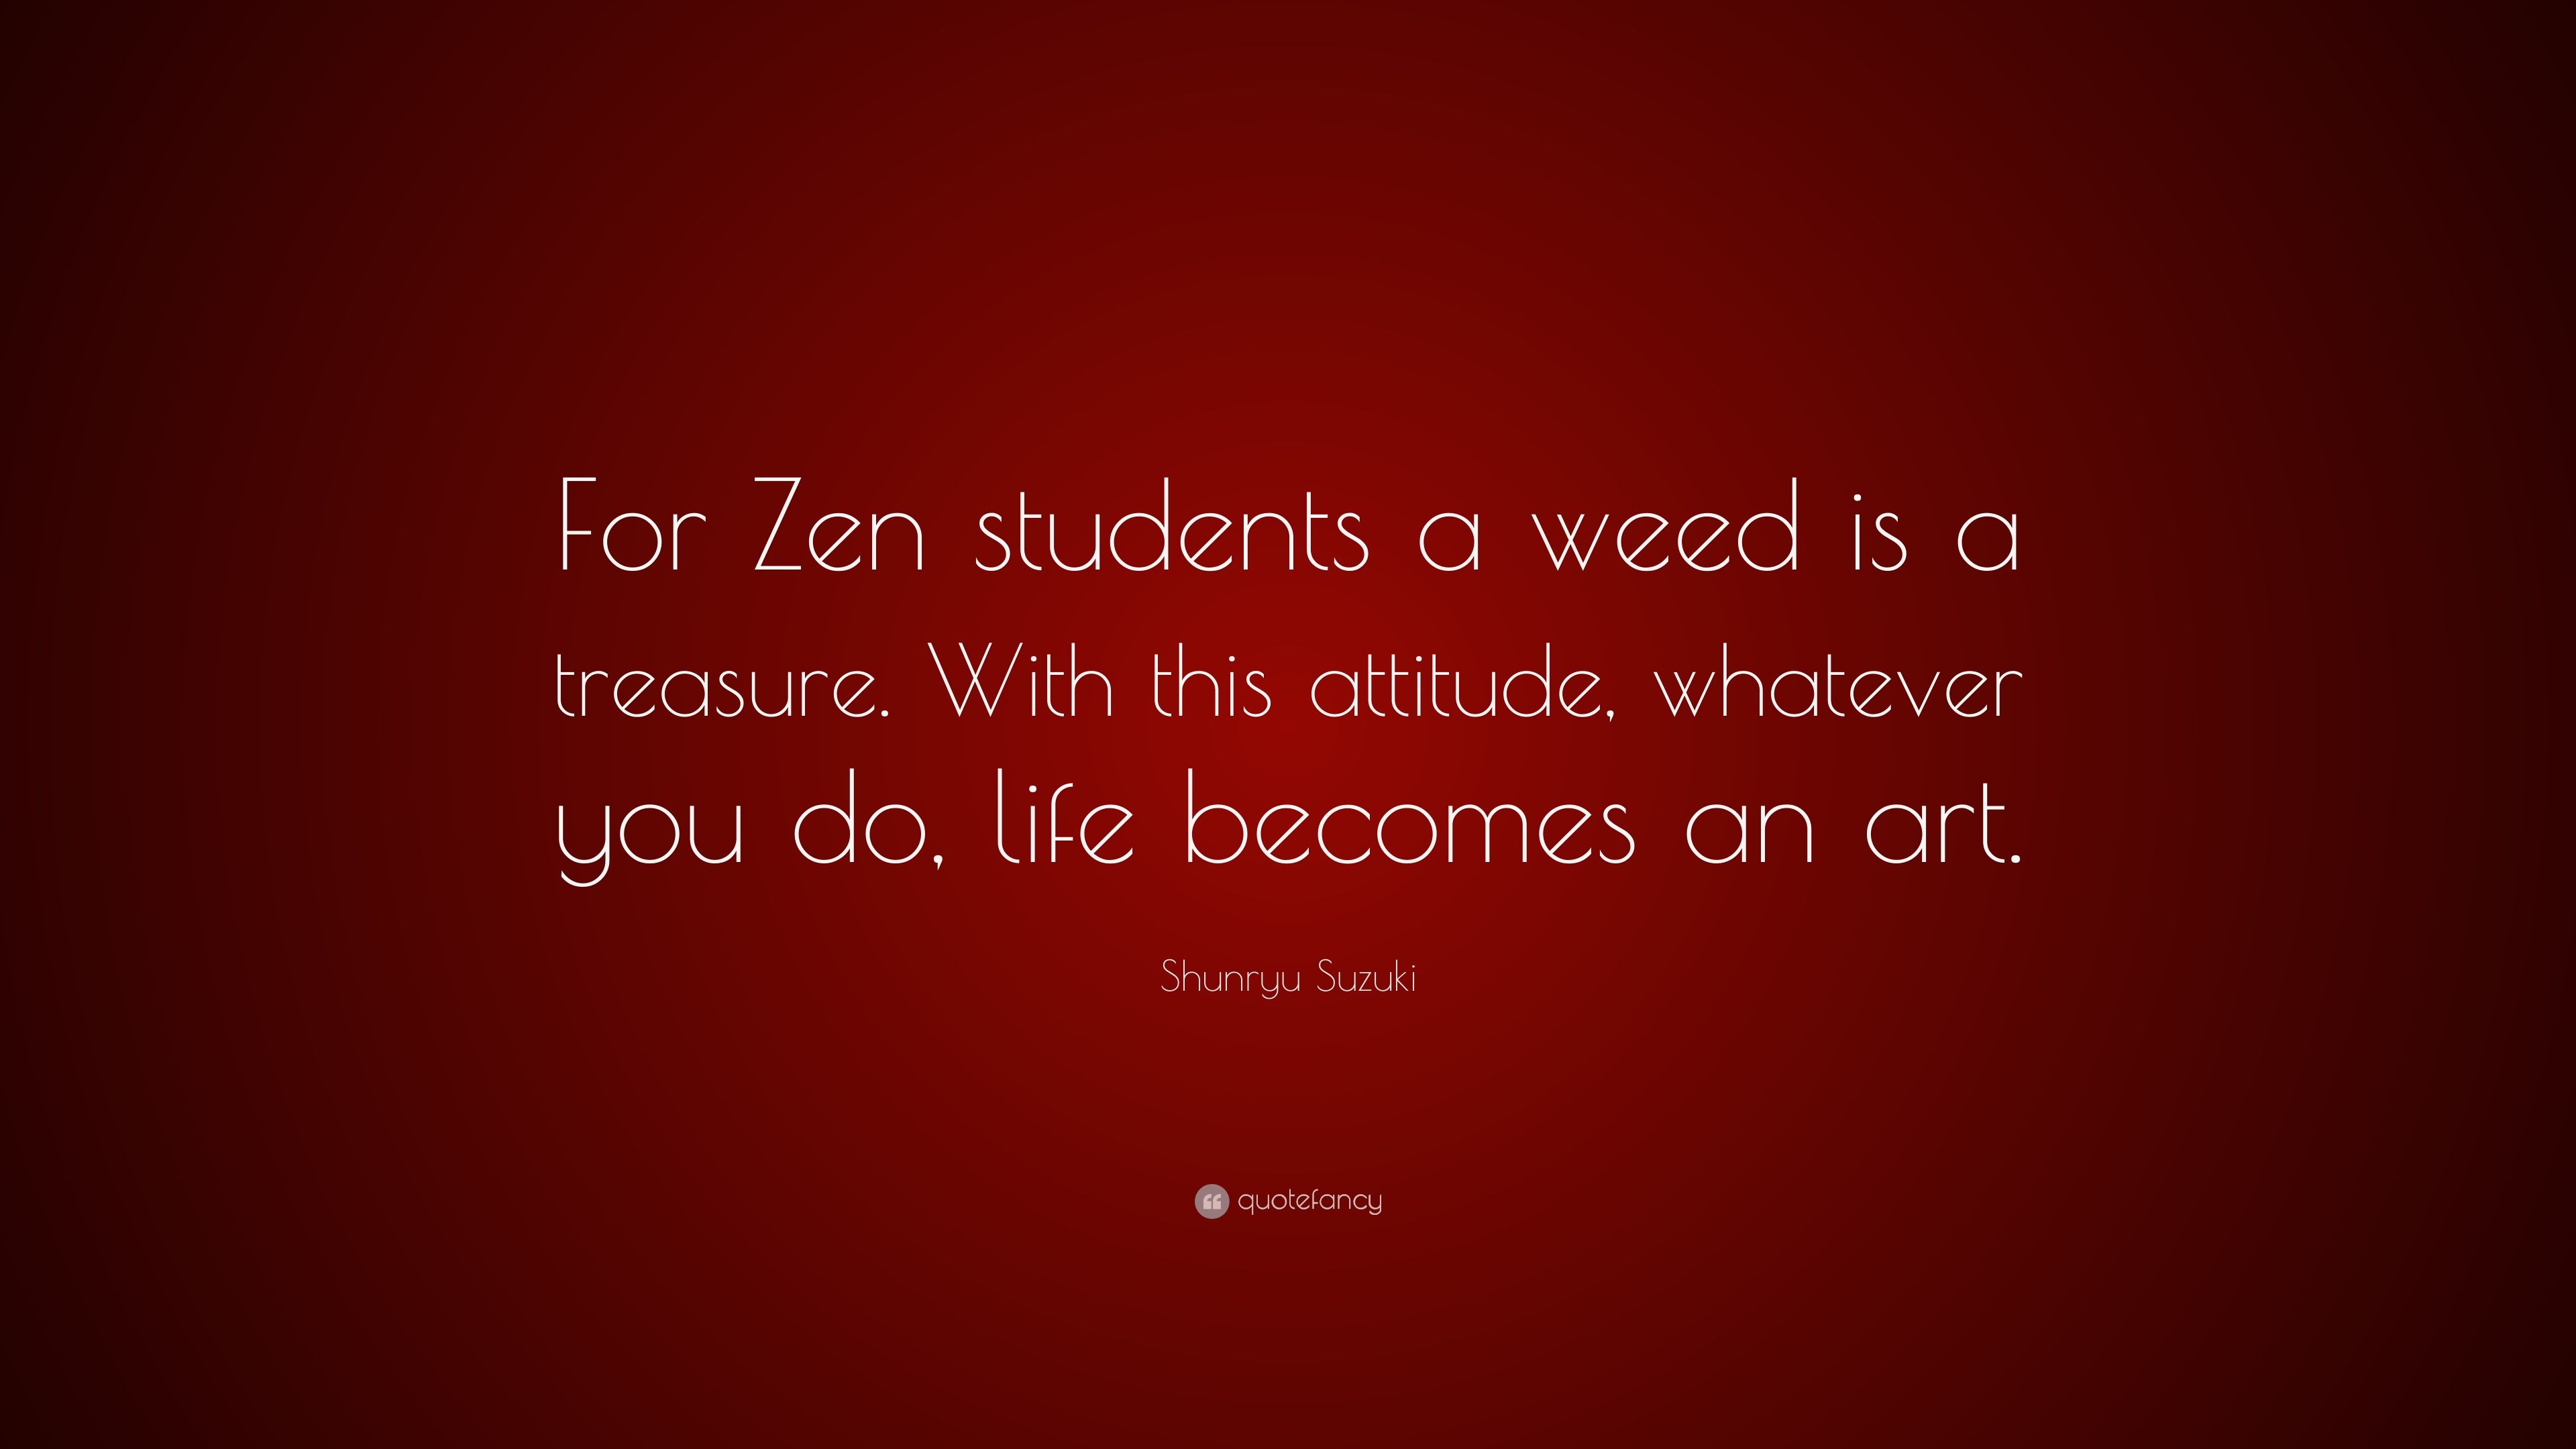 Shunryu Suzuki Quote: “For Zen students a weed is a treasure. With